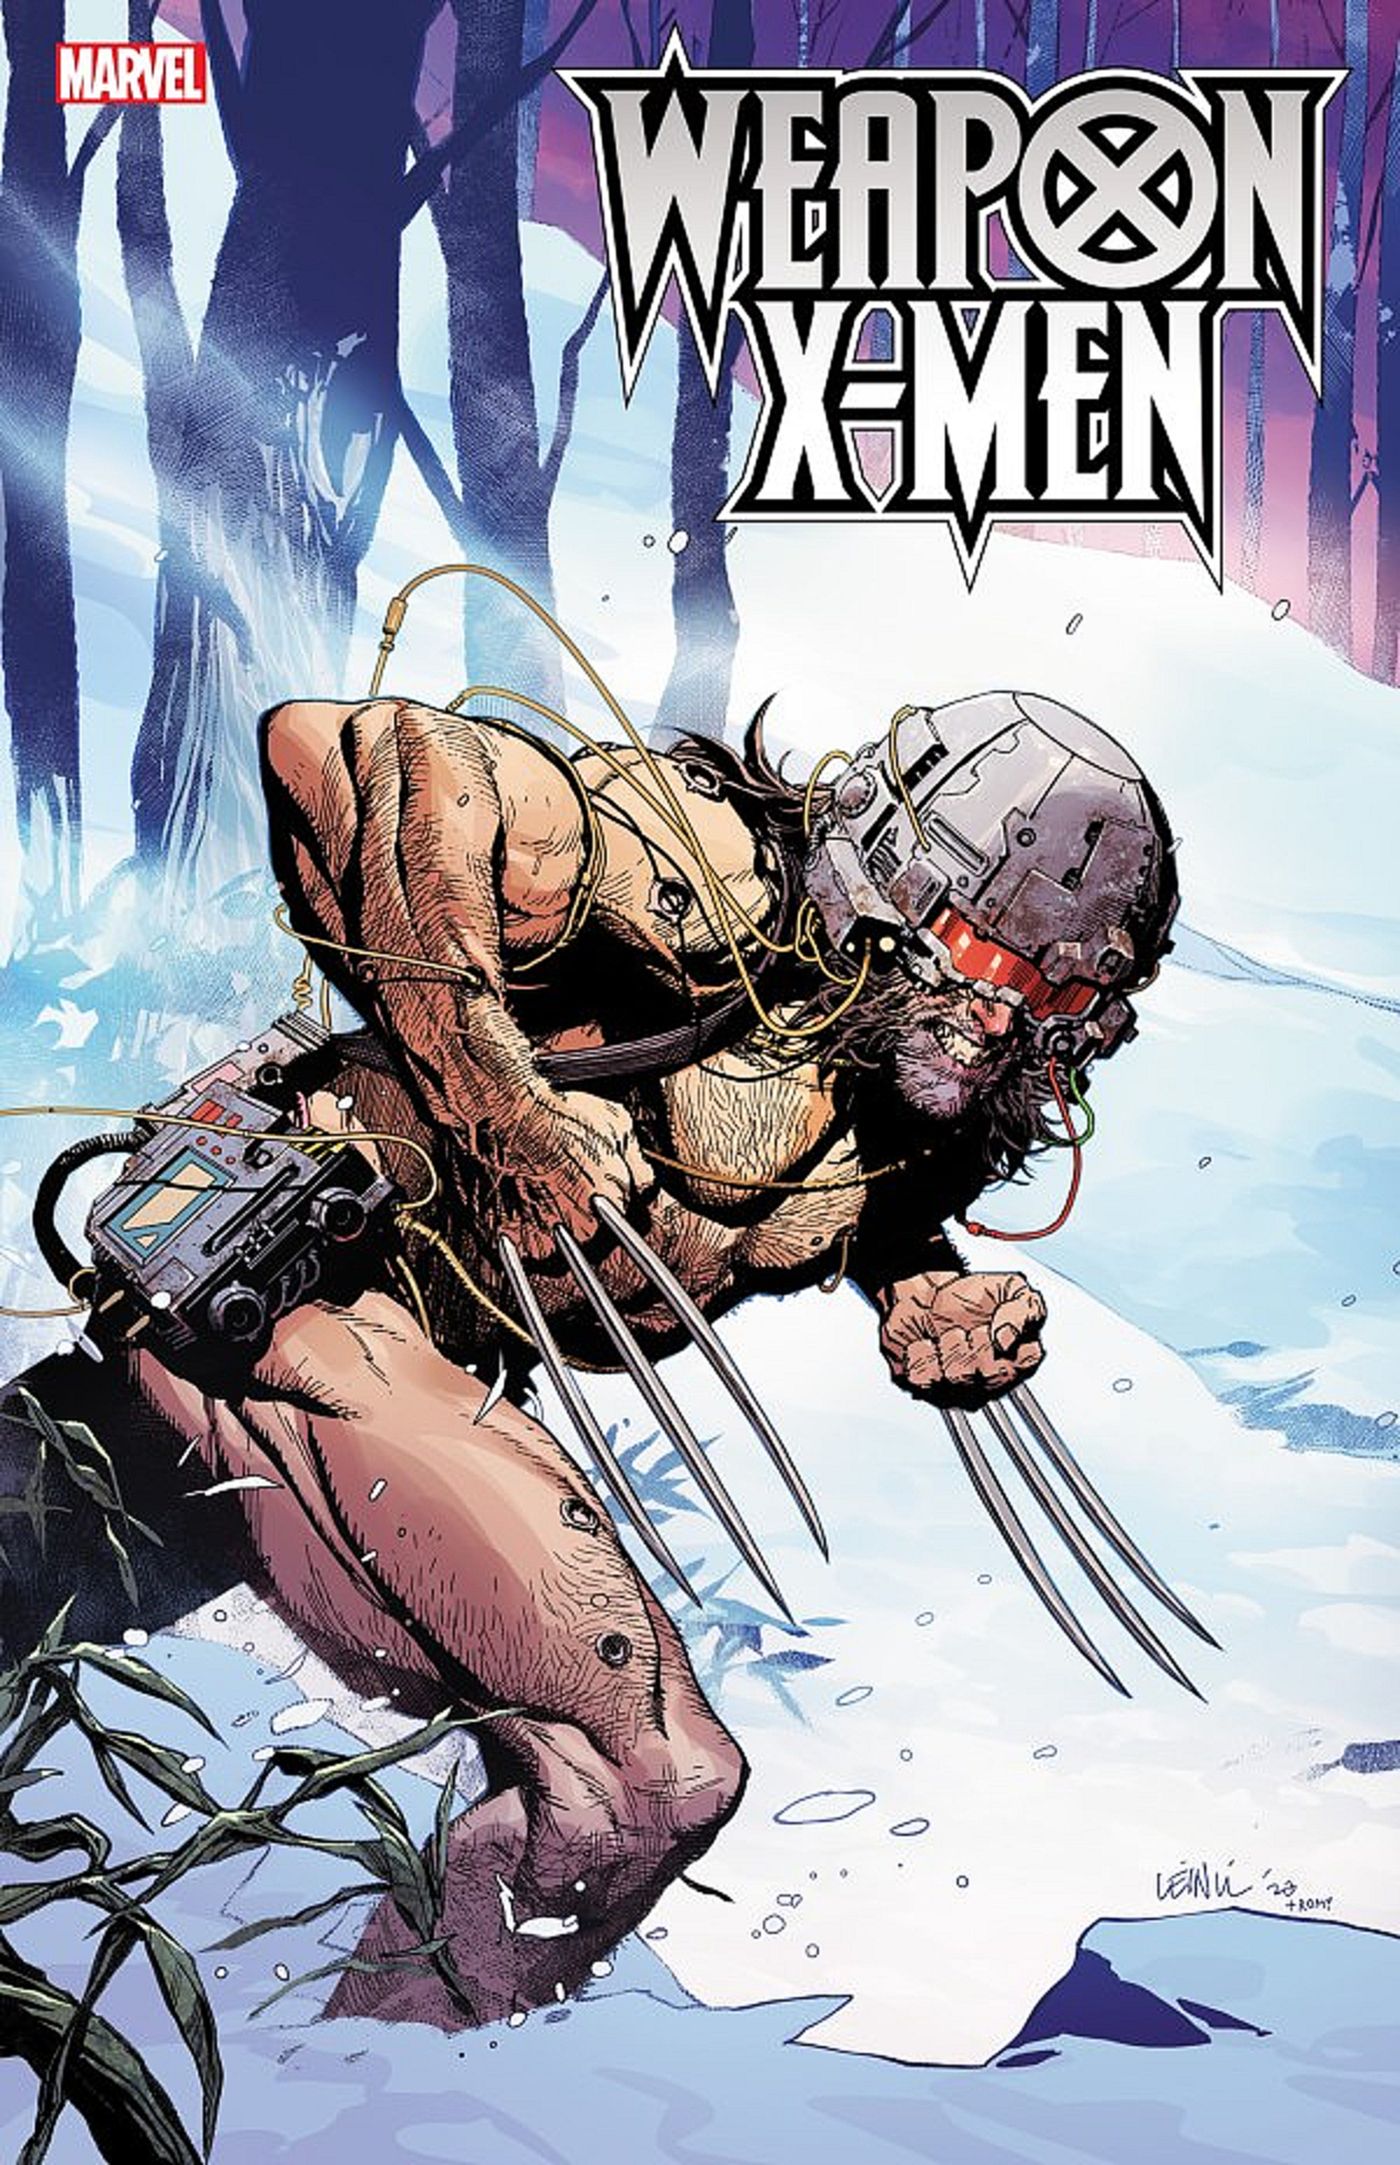 Weapon X-Men #2 variant cover by Leinil Francis Yu, Wolverine freshly escaped from Weapon X trekking through snow